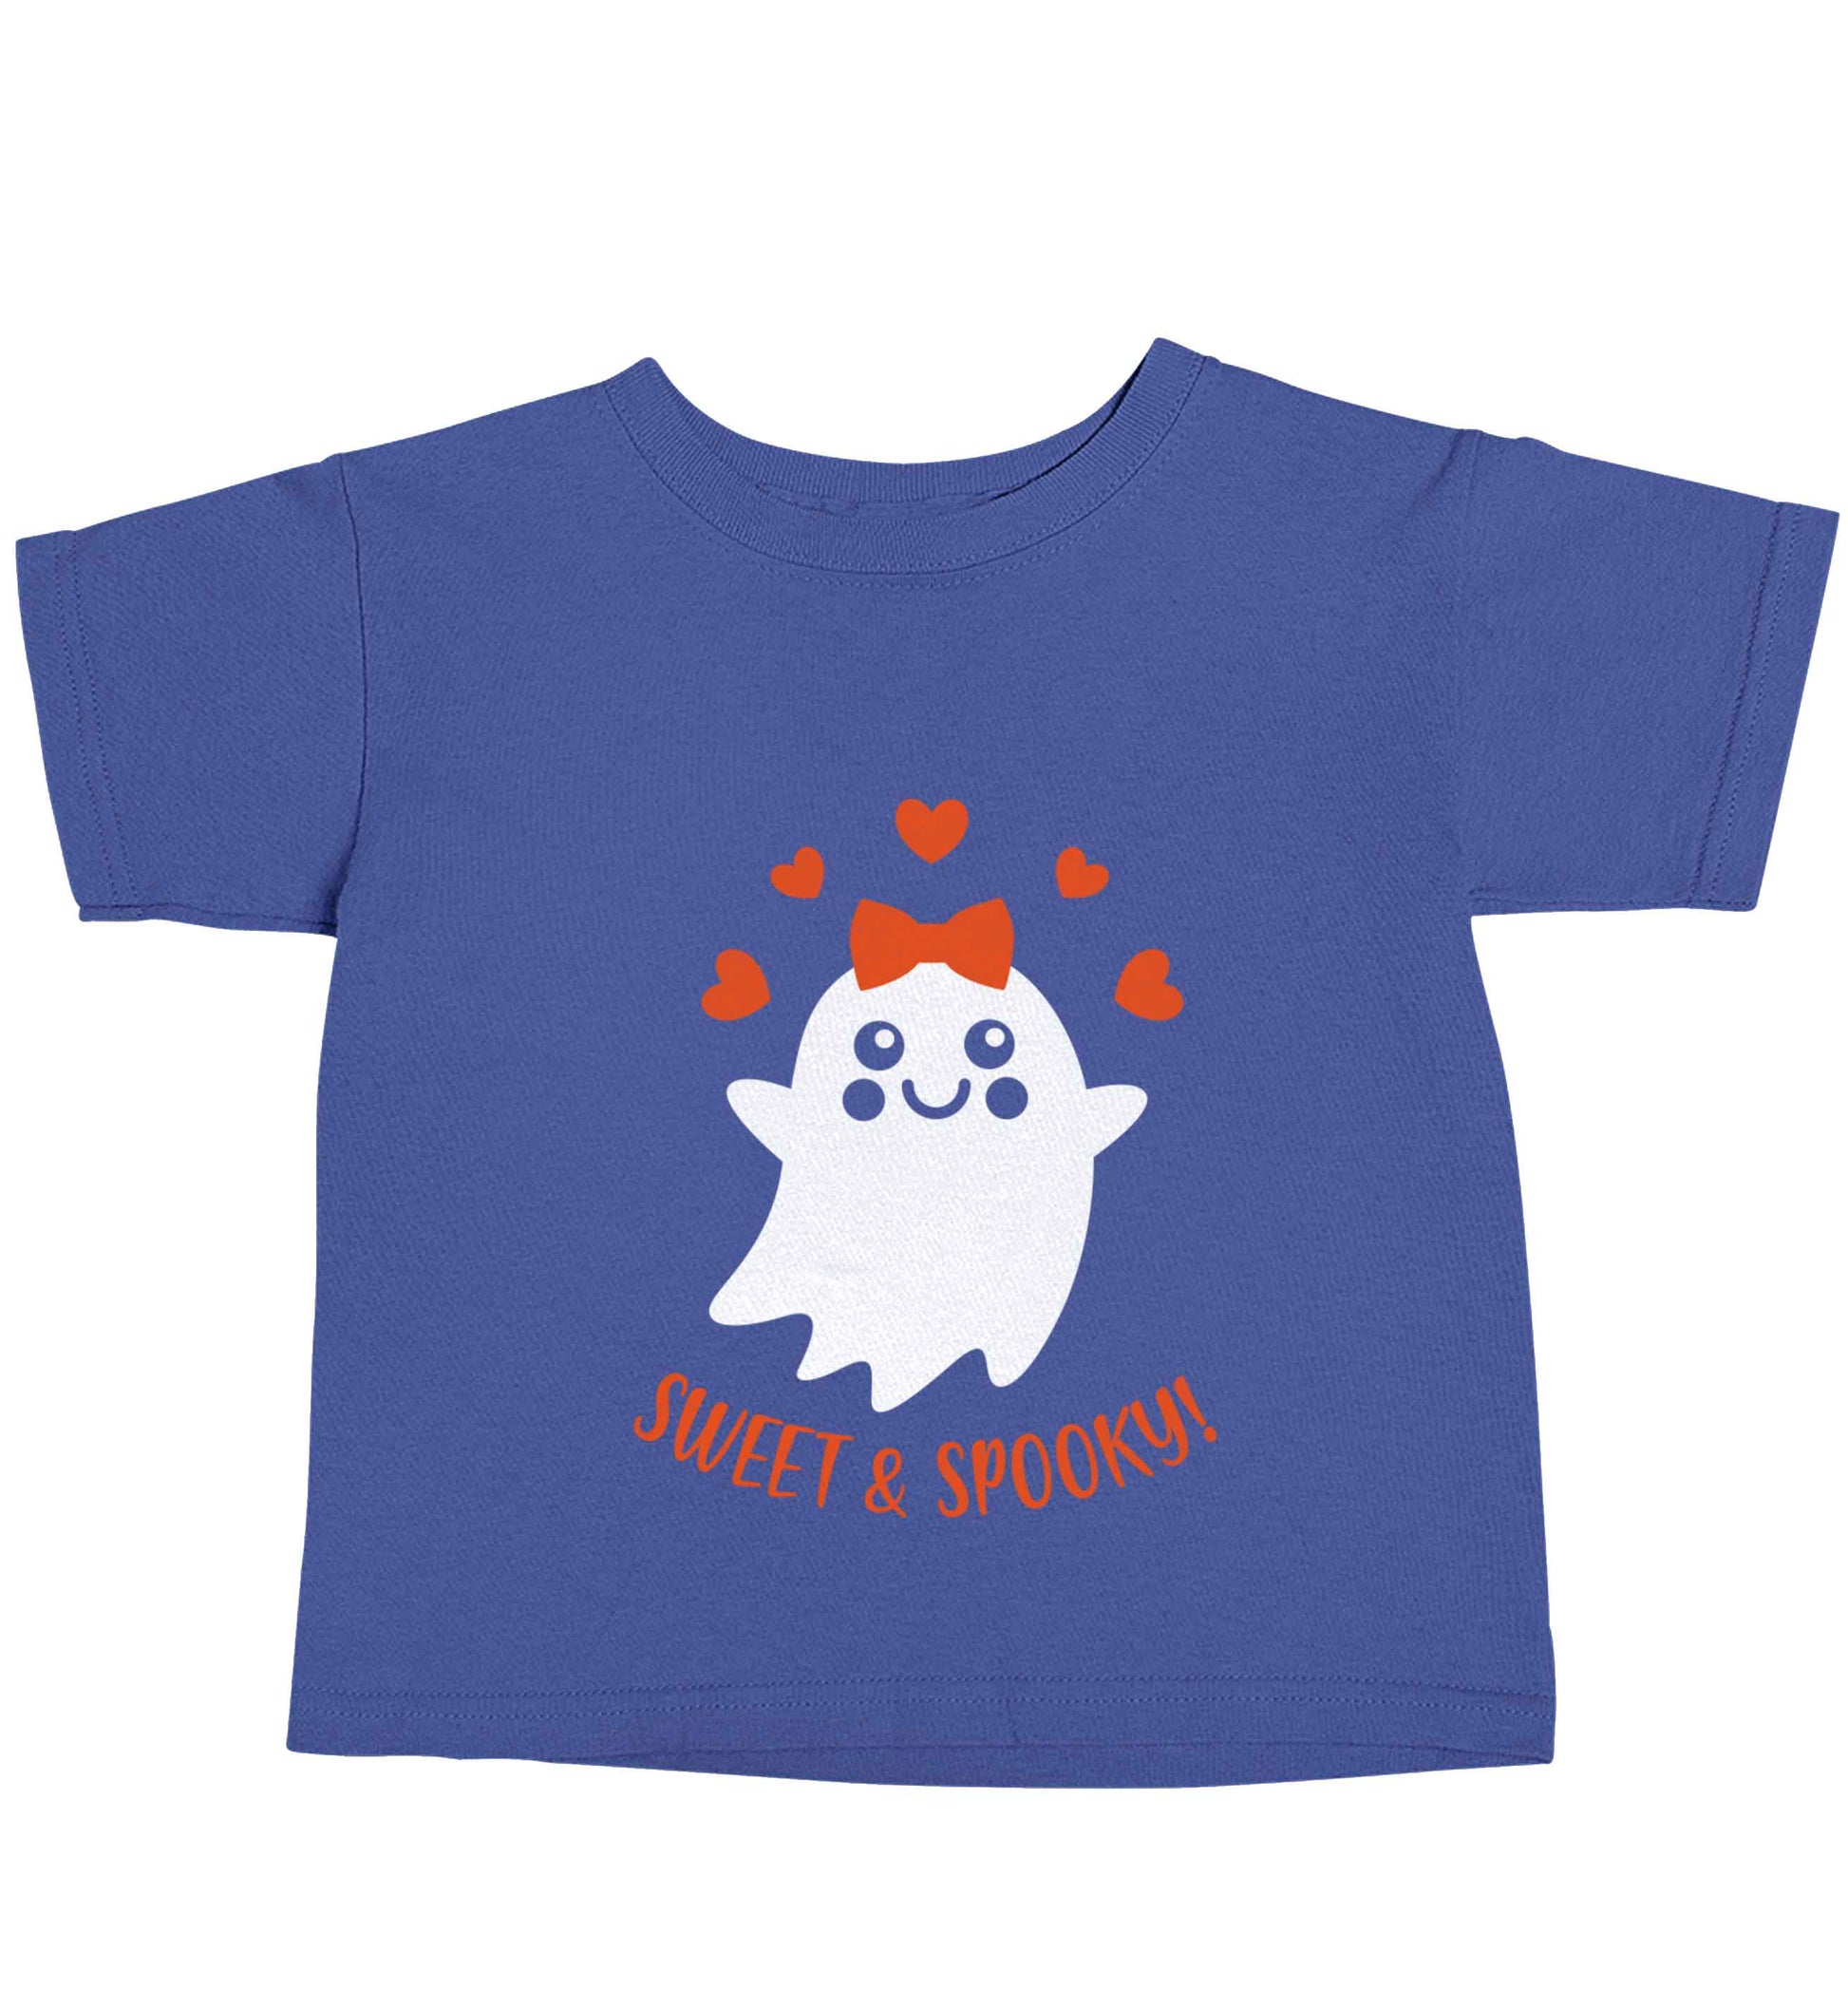 Sweet and spooky blue baby toddler Tshirt 2 Years